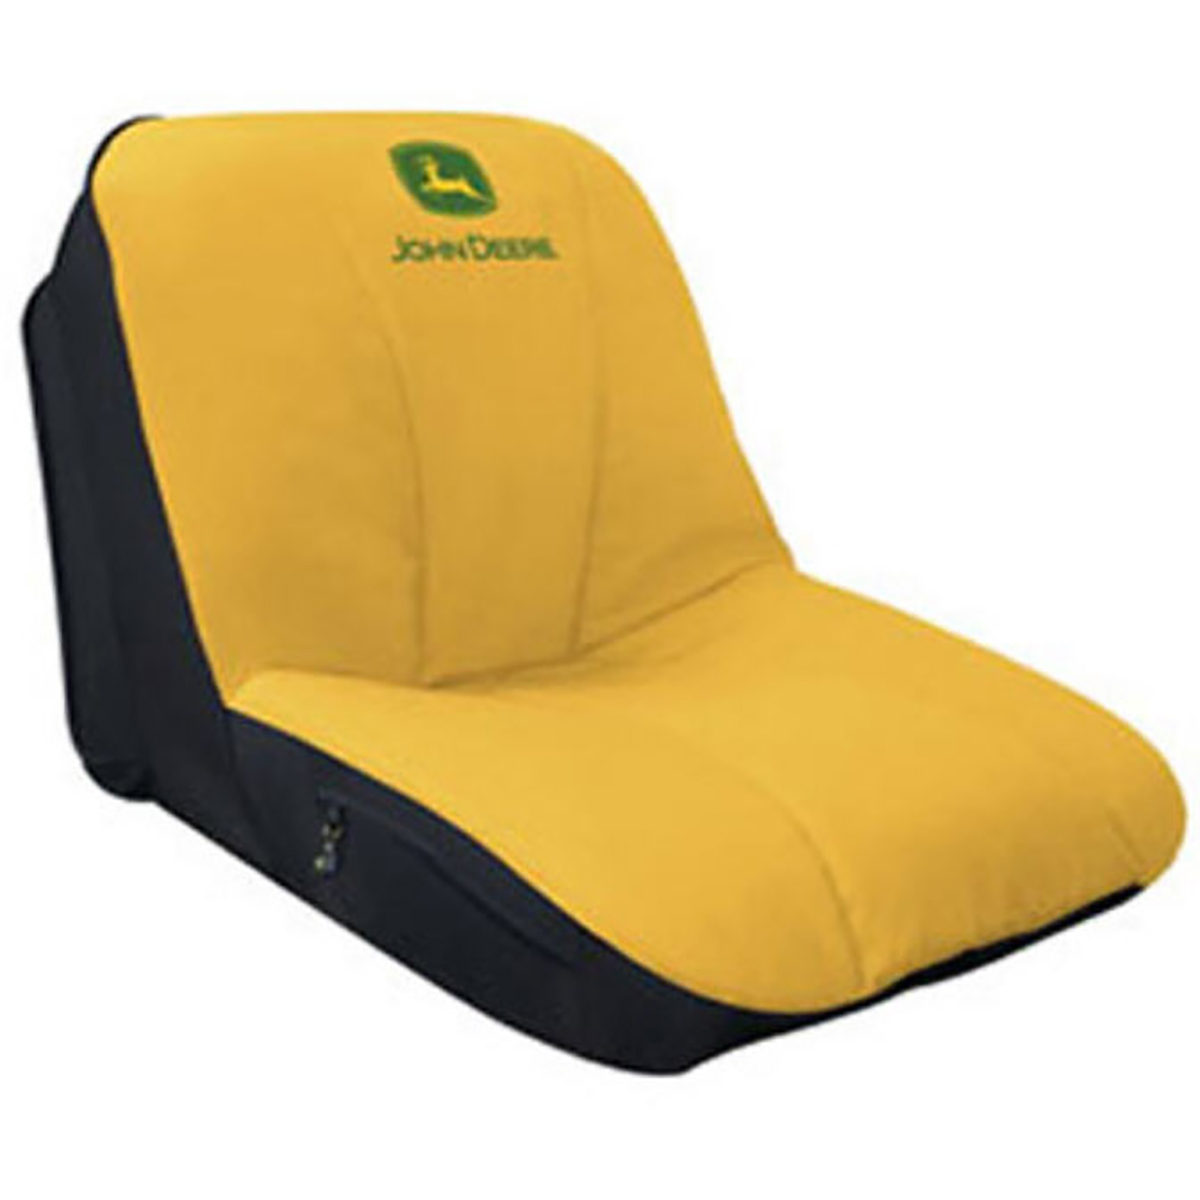 Deluxe Medium Seat Cover For Gators And Riding Lawn Equipment